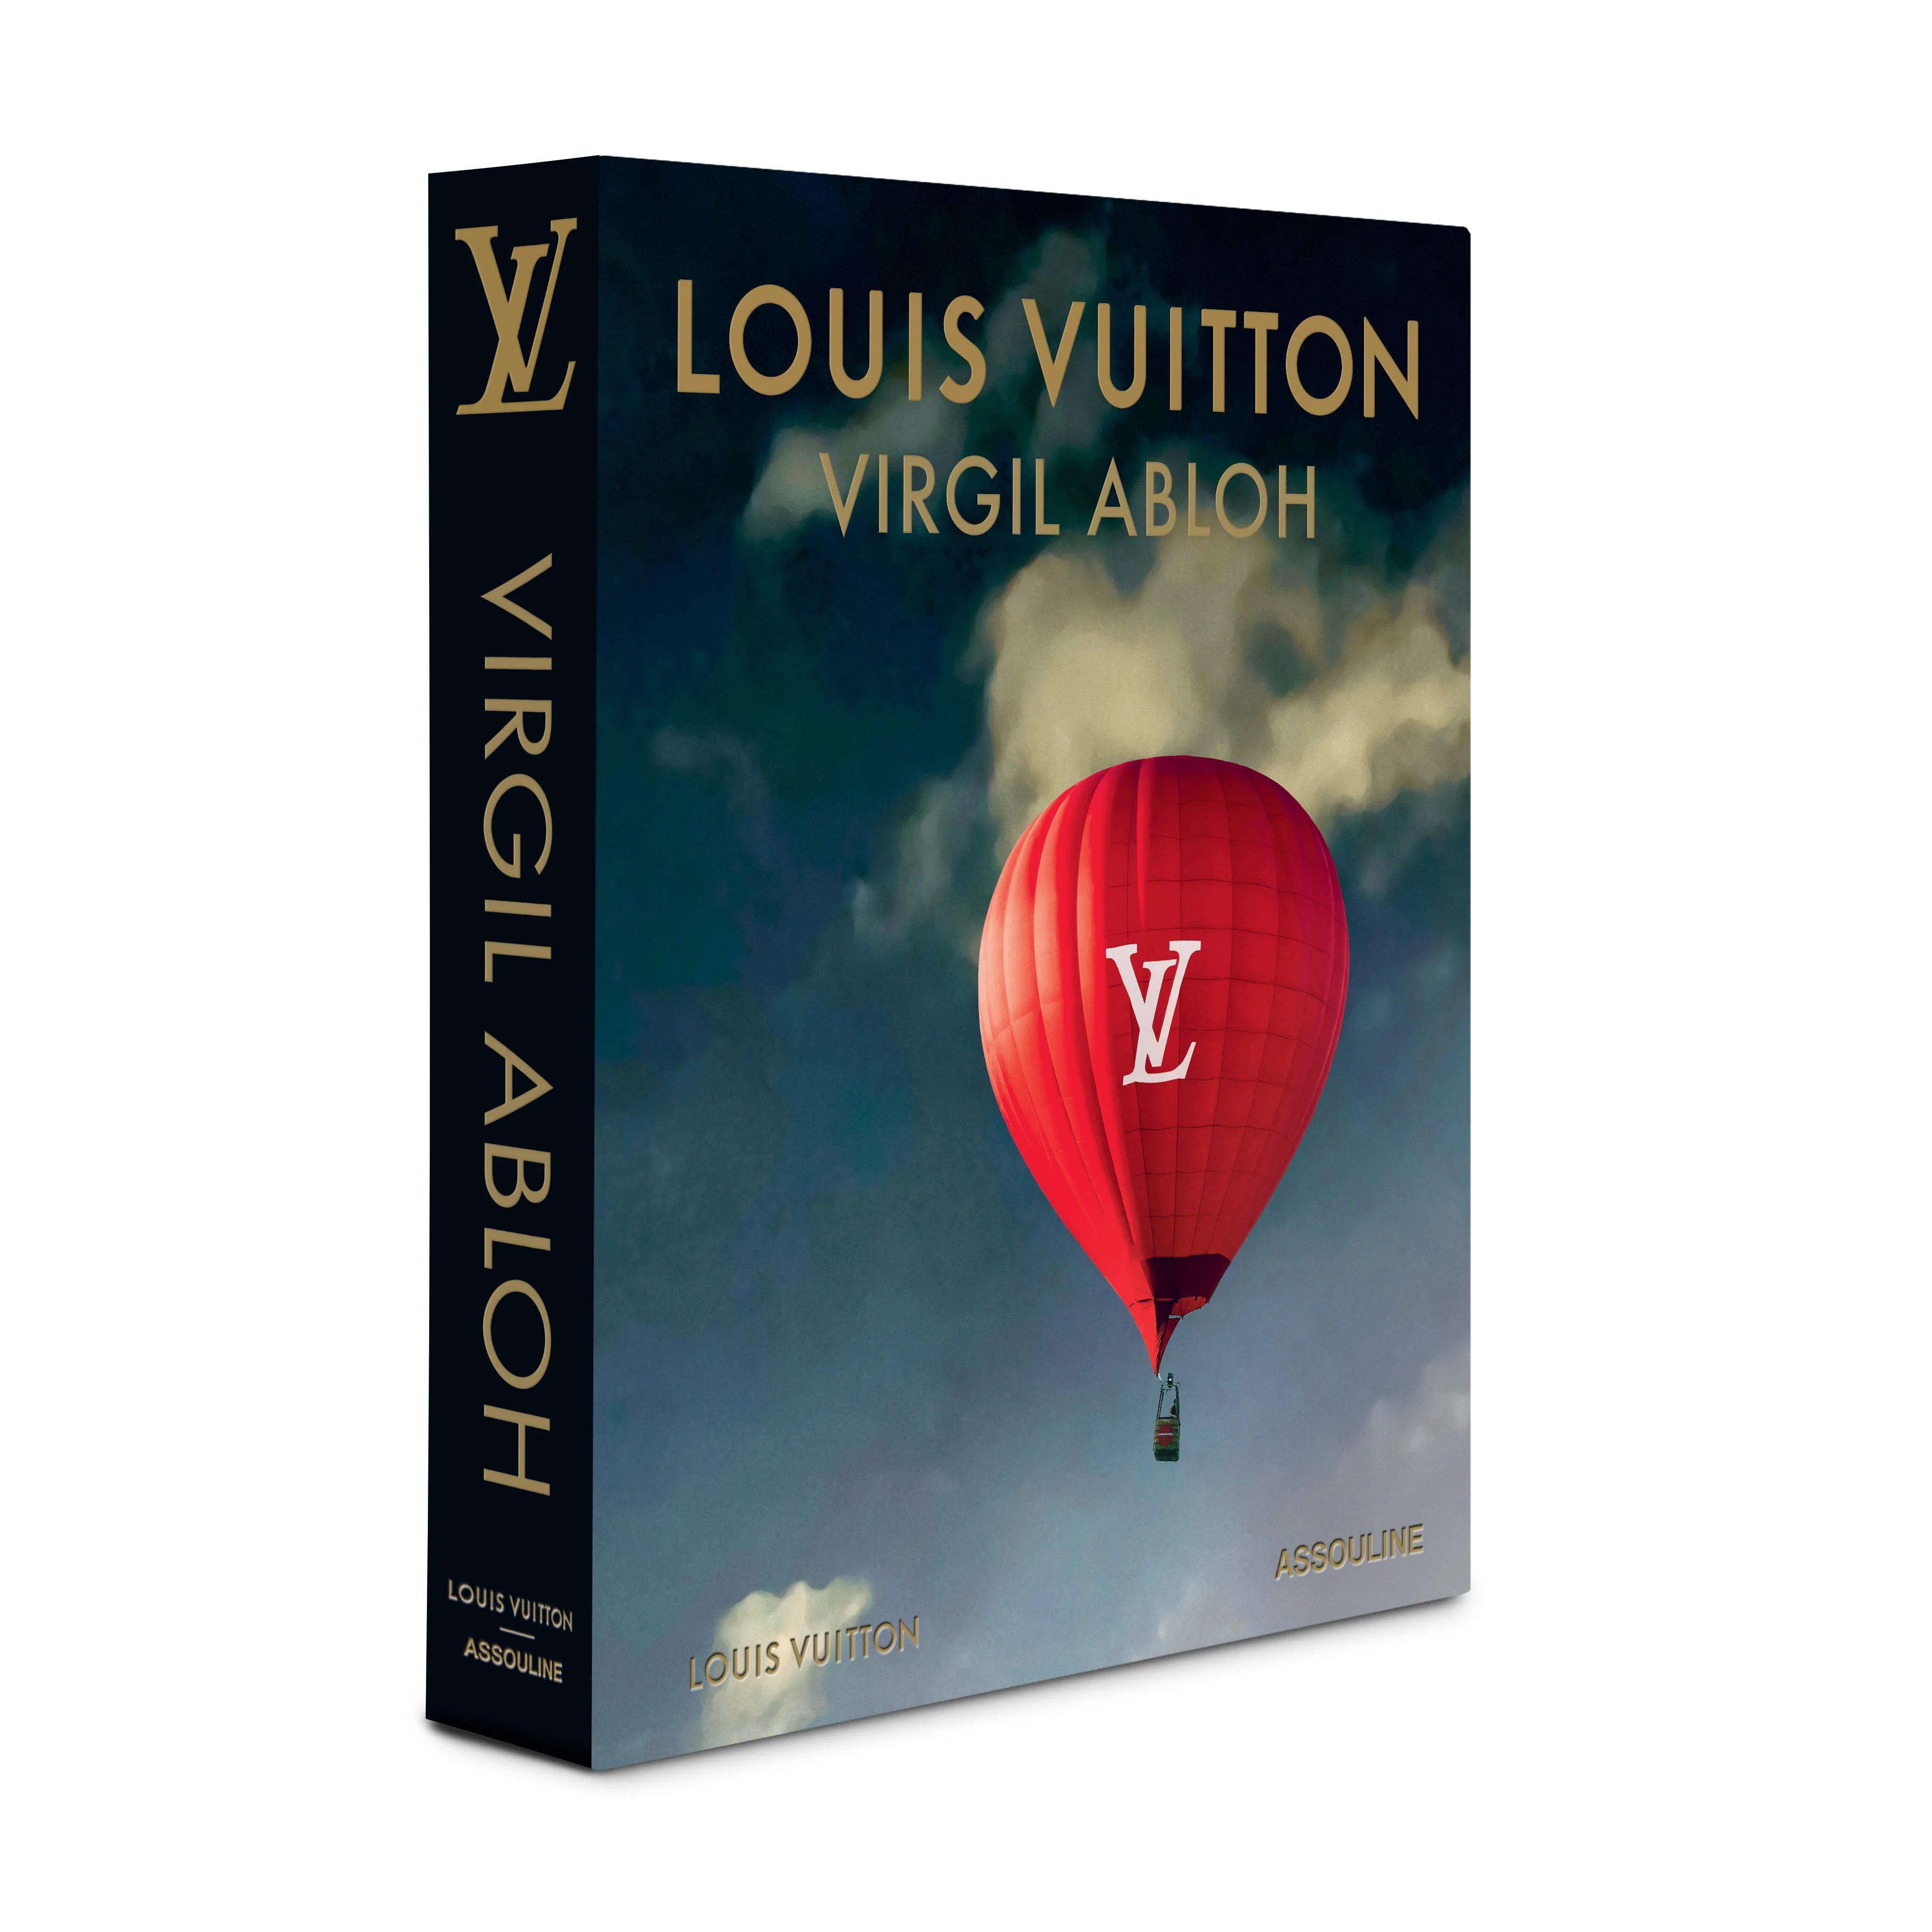 HOT Louis Vuitton Luxury Brand Blue Hoodie Limited Edition